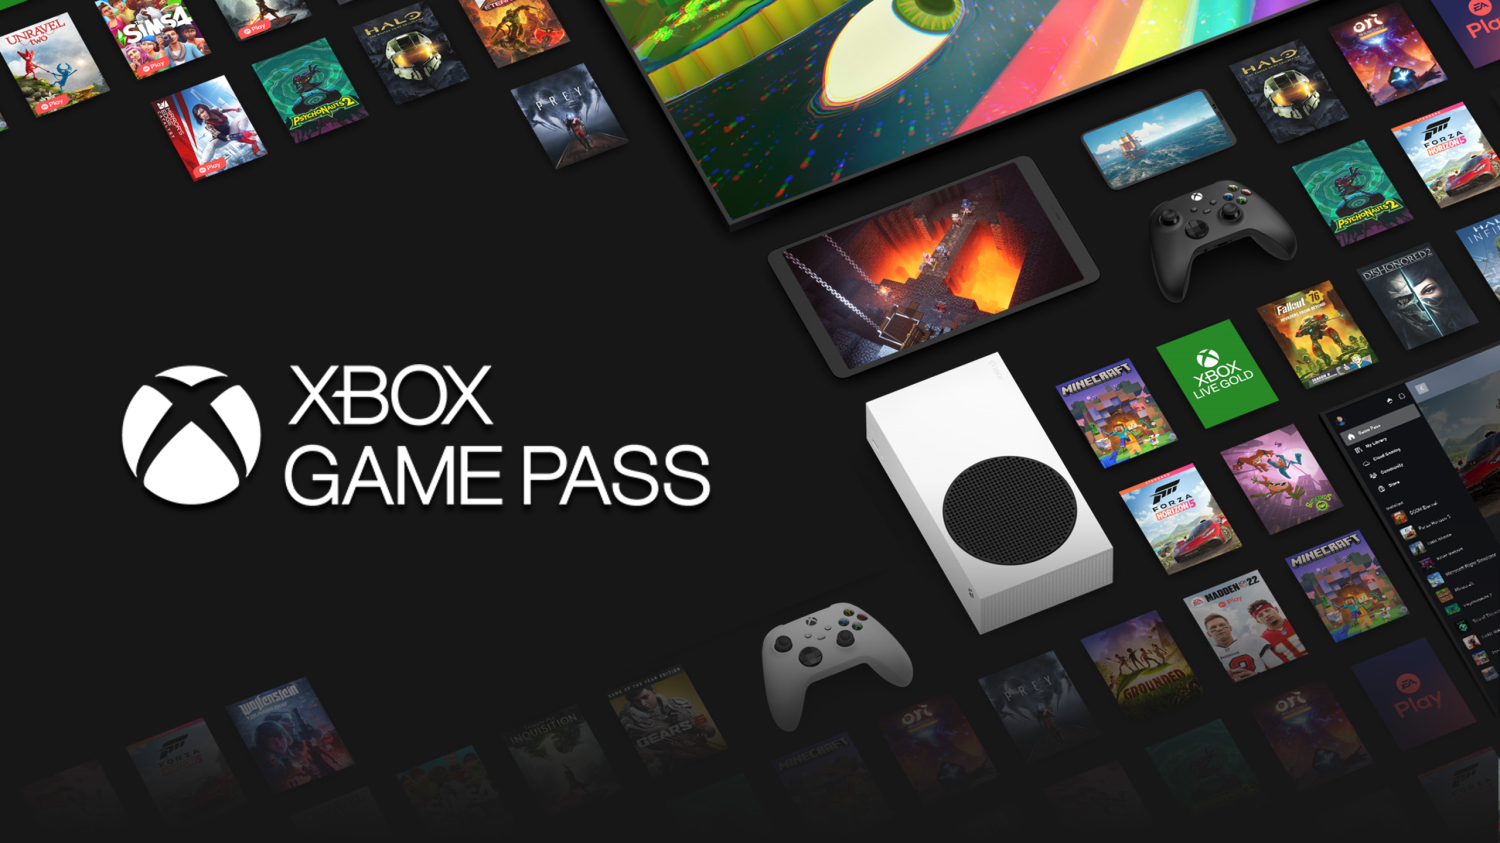 Xbox Game Pass is getting EA Play games on November 10th - The Verge